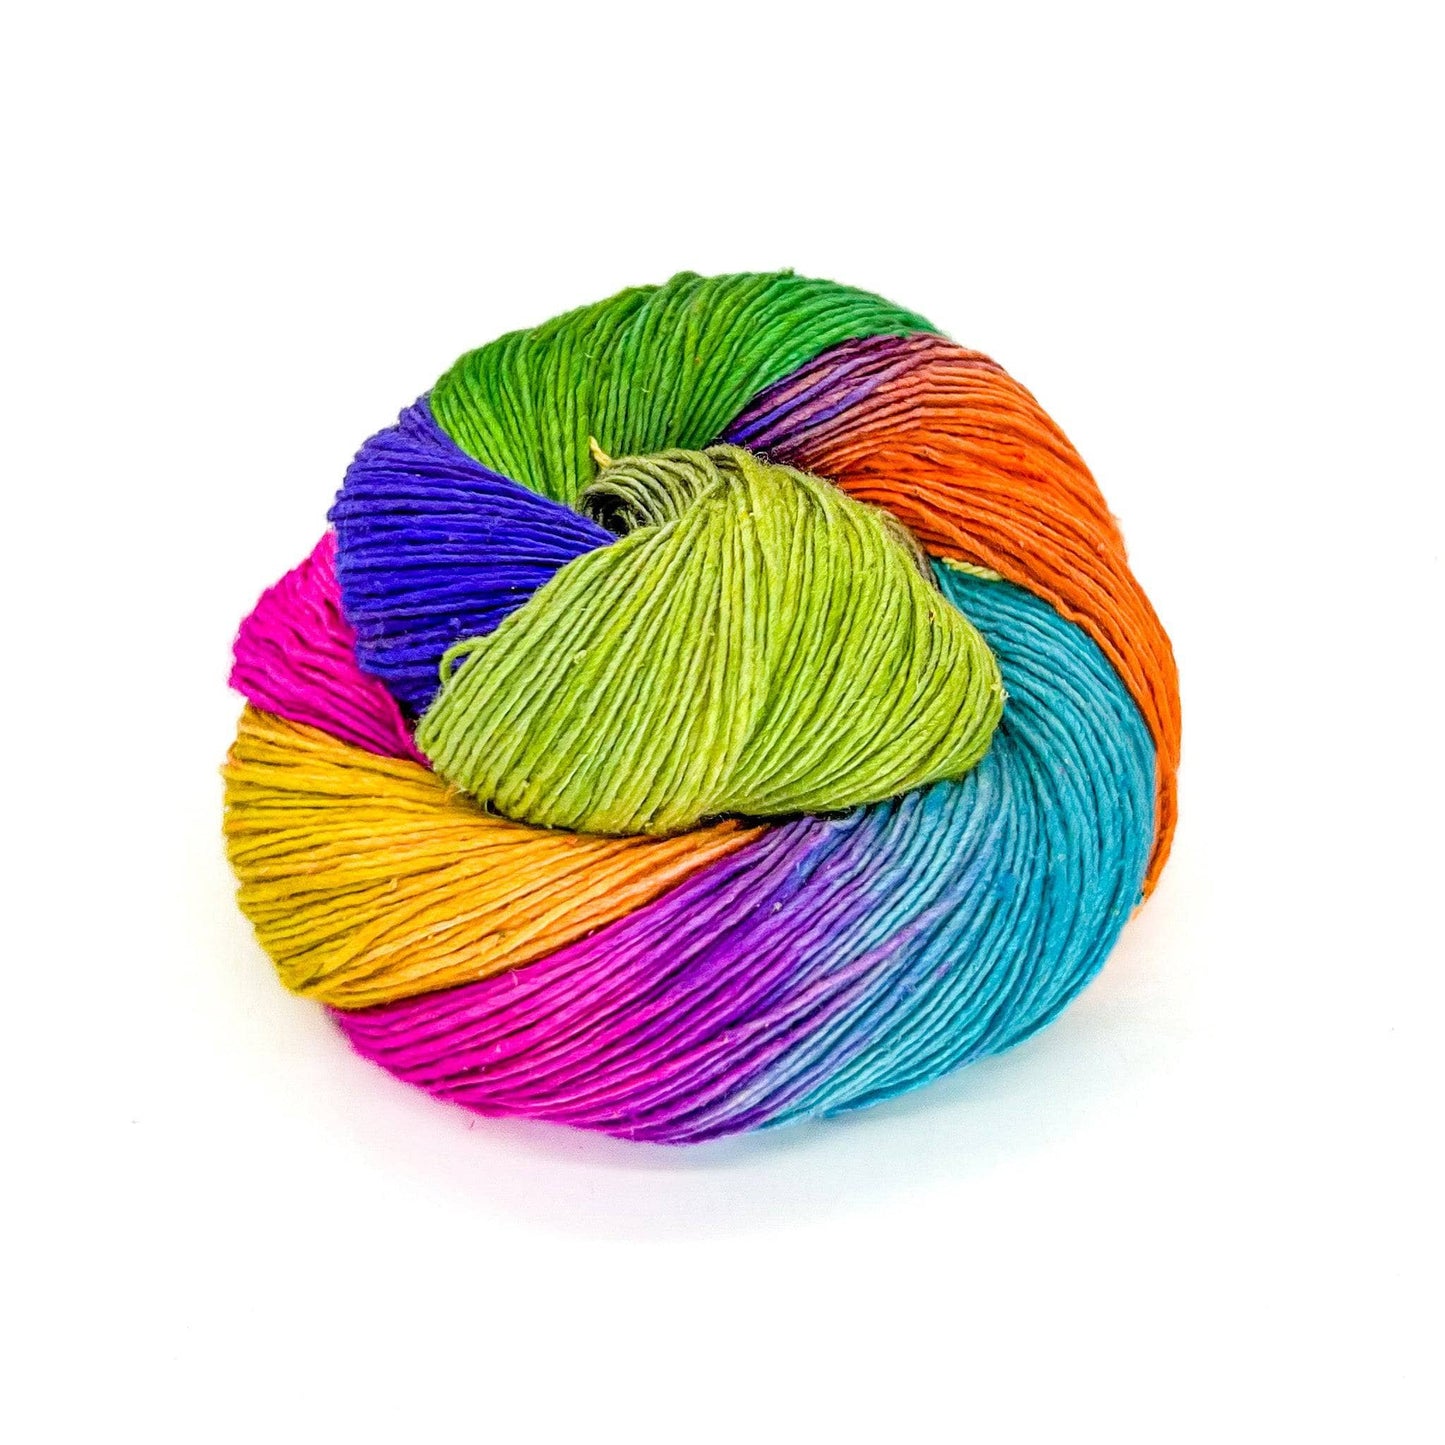 Sport weight silk yarn in Dyed to look like the LGBTQIA+ Pride Flag. This yarn supports the capital pride center in Albany, New York.